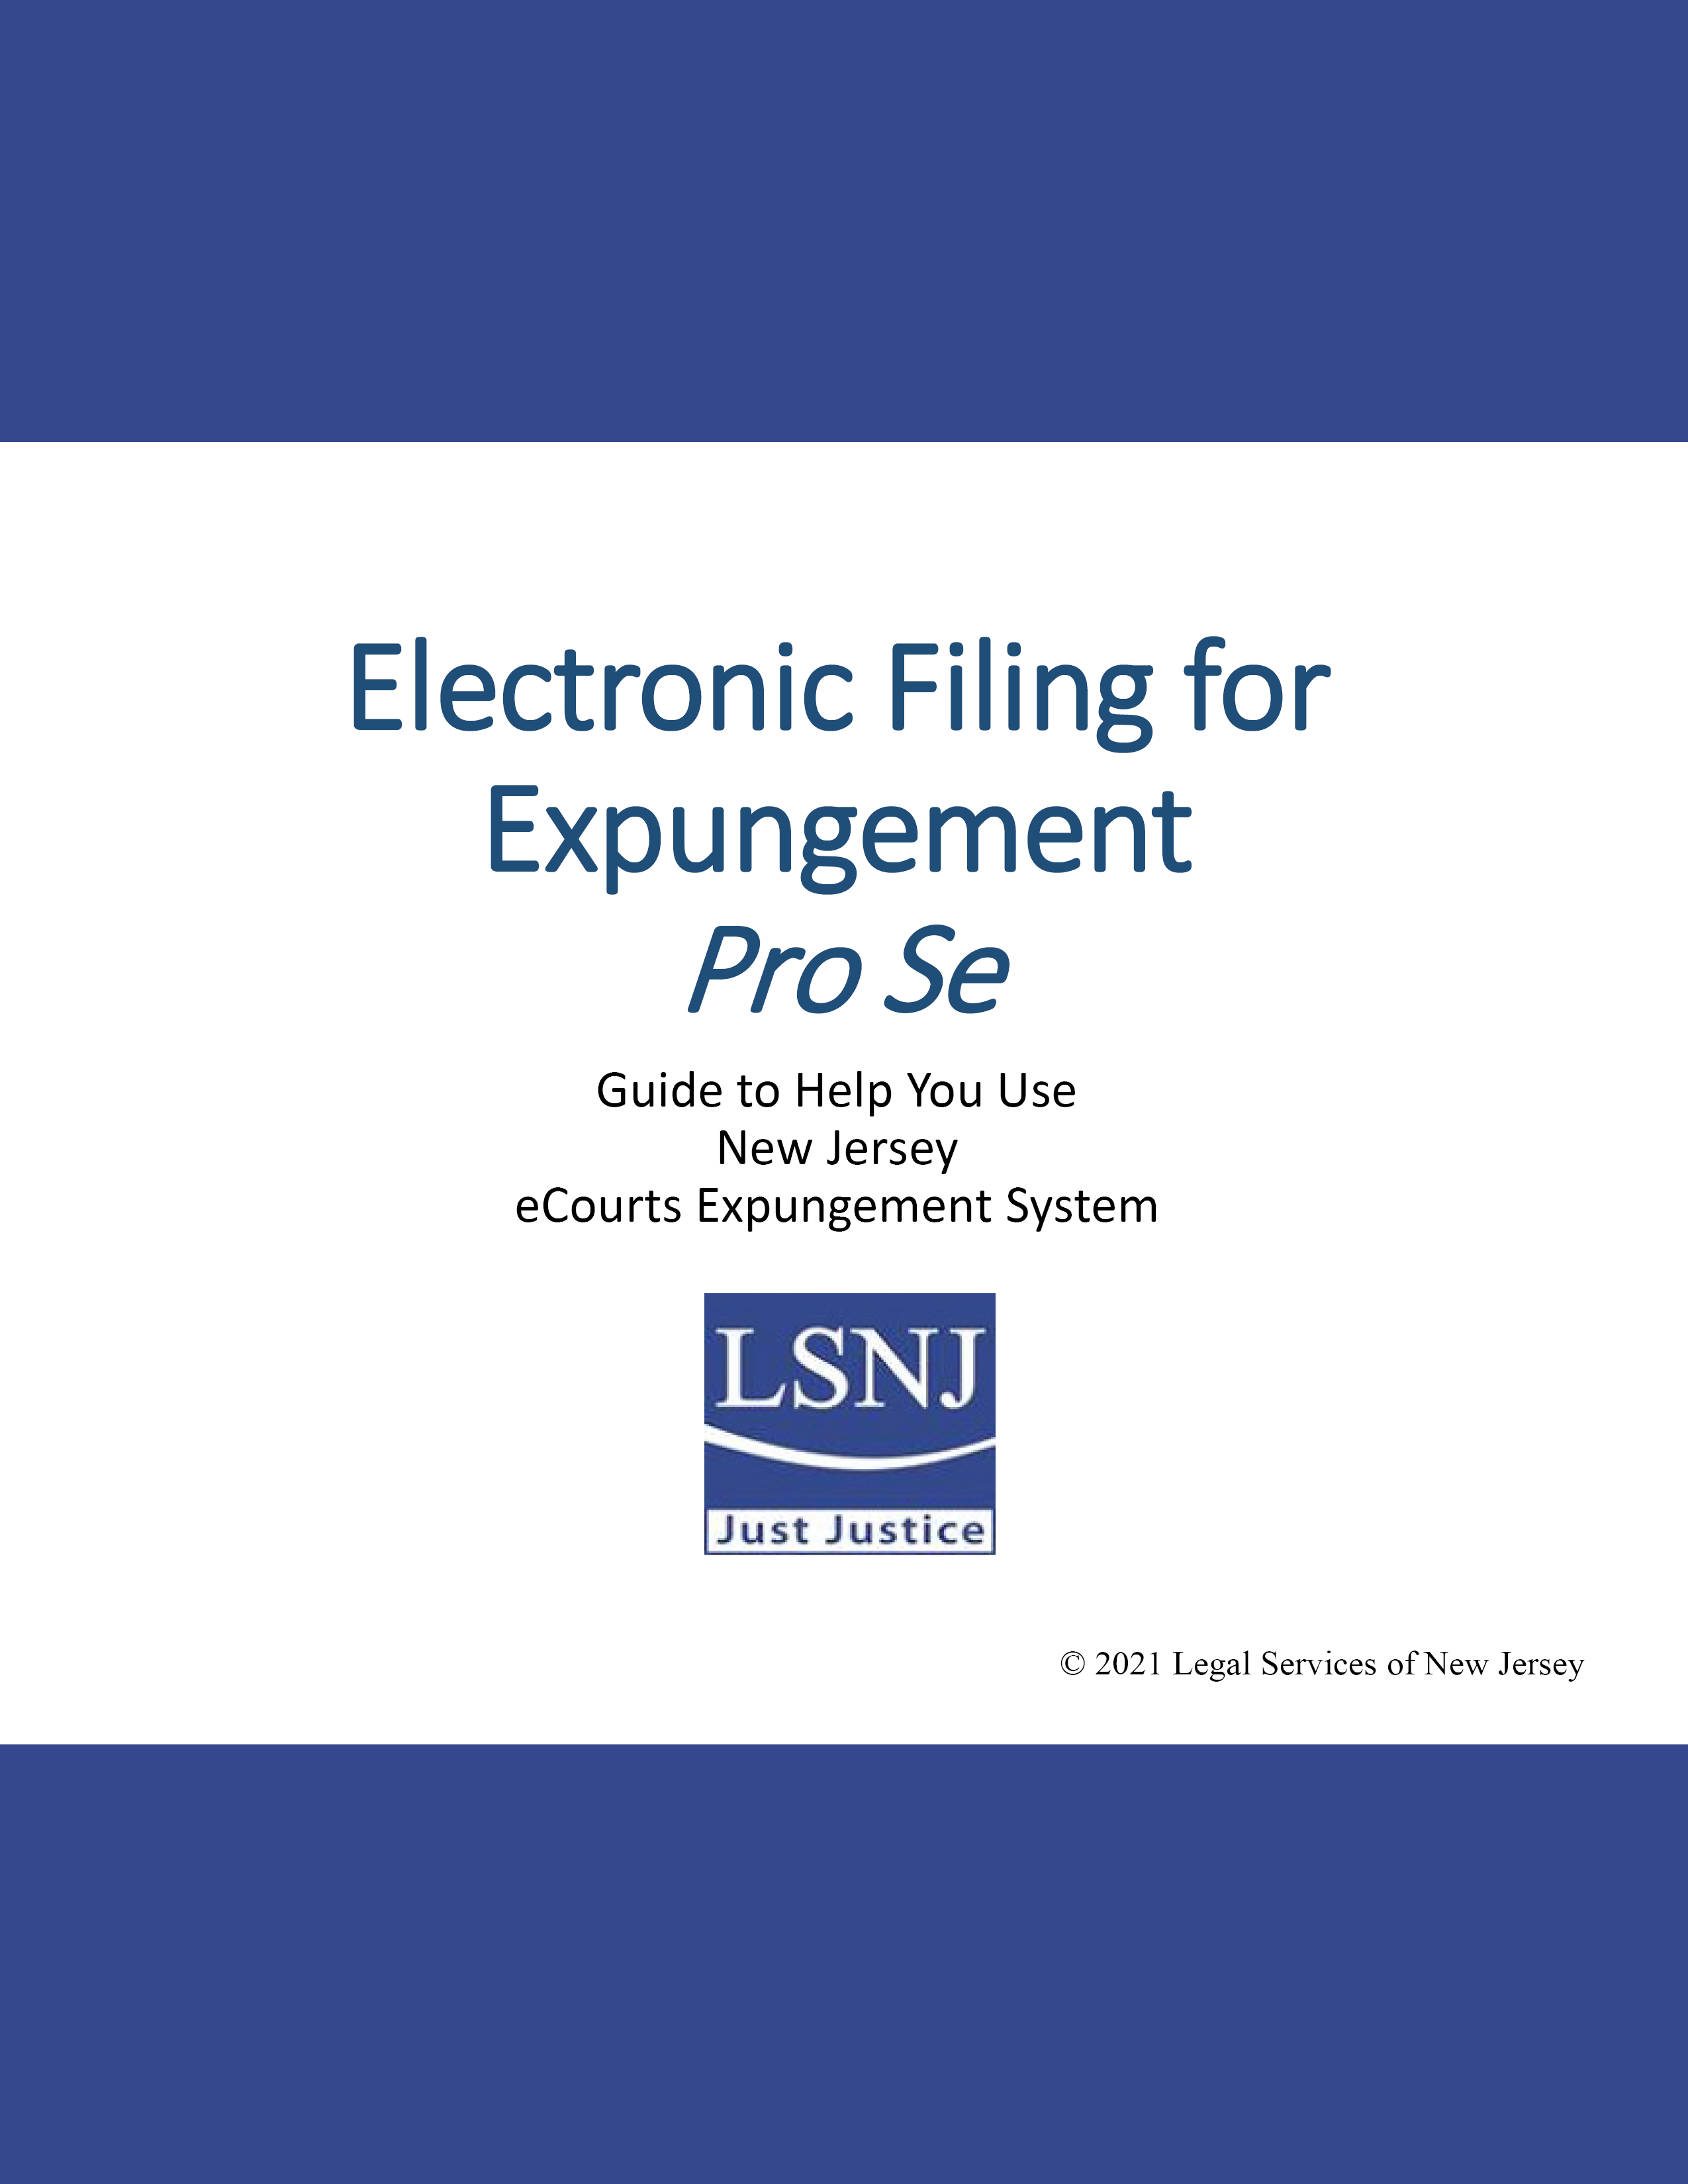 Electronic Filing for Expungement Pro Se